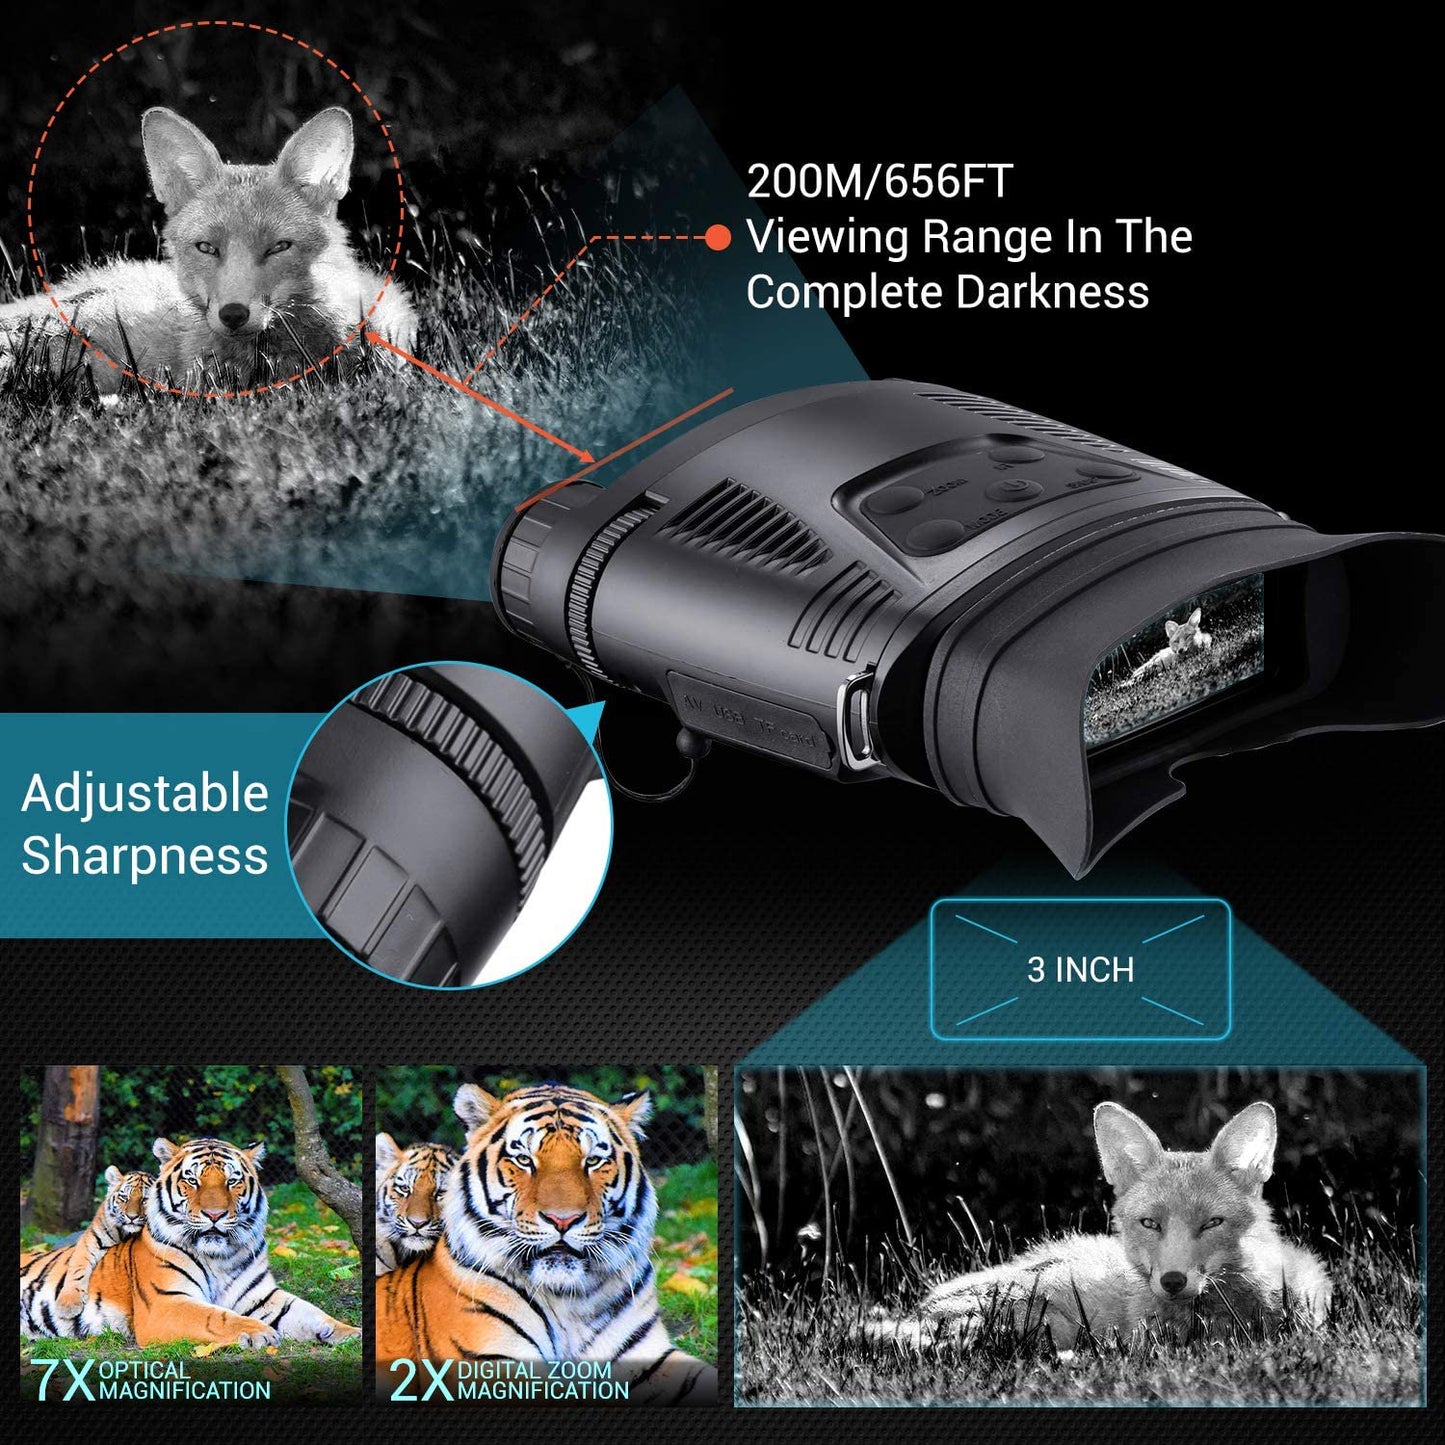 Night Vision Goggles -Night Vision Binoculars for Adults, 3.3'' Large Screen Binoculars can Save Photo and Video with 32GB Memory